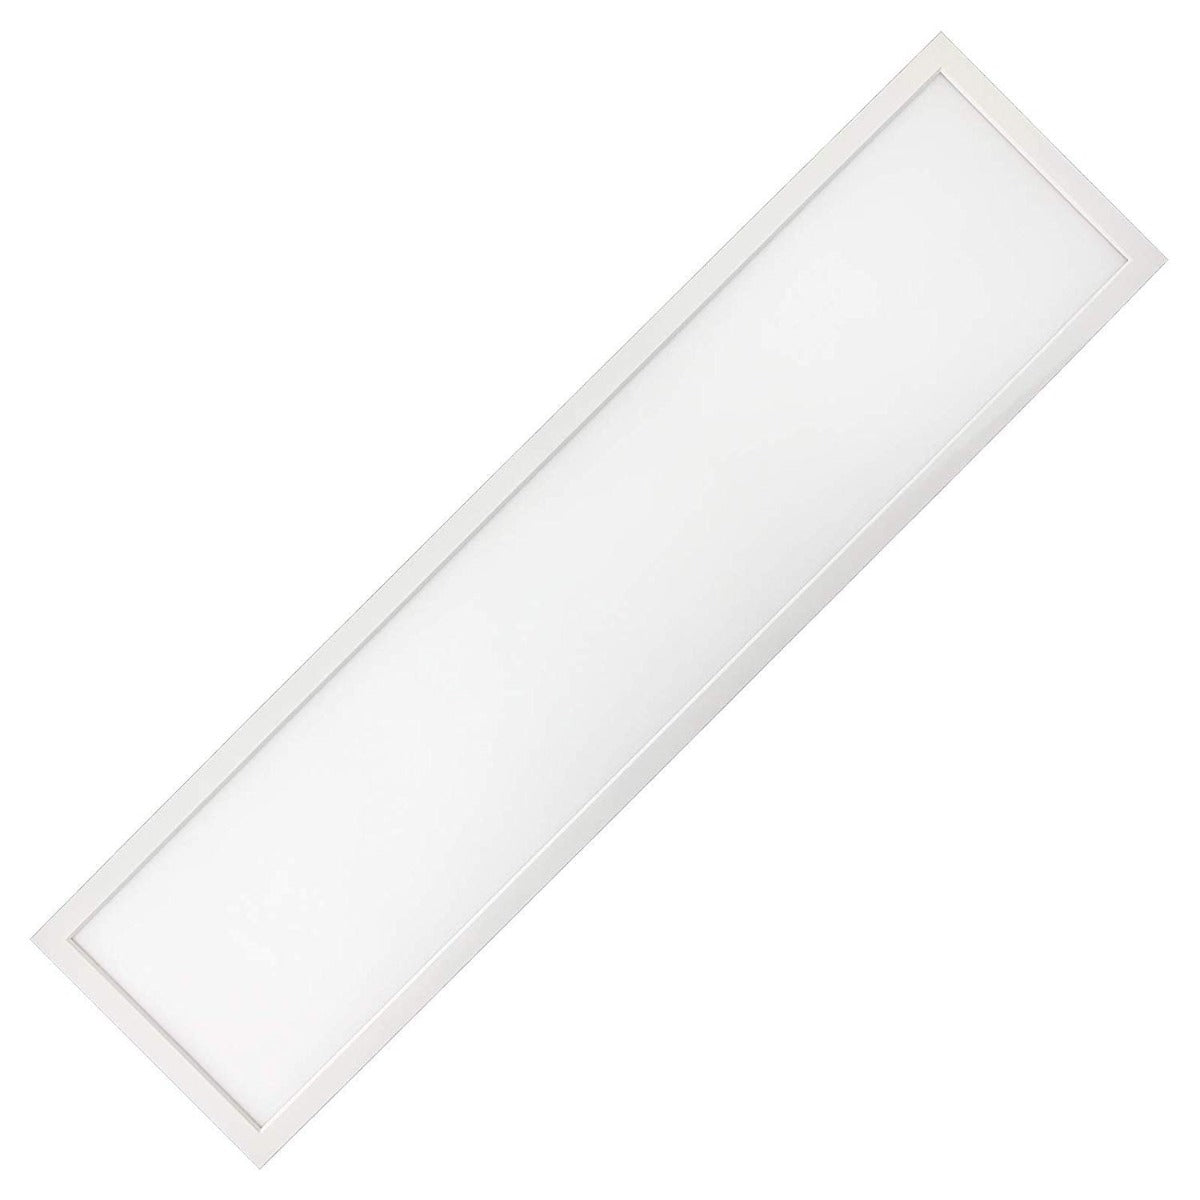 View 1200x300 LED Panel Light information